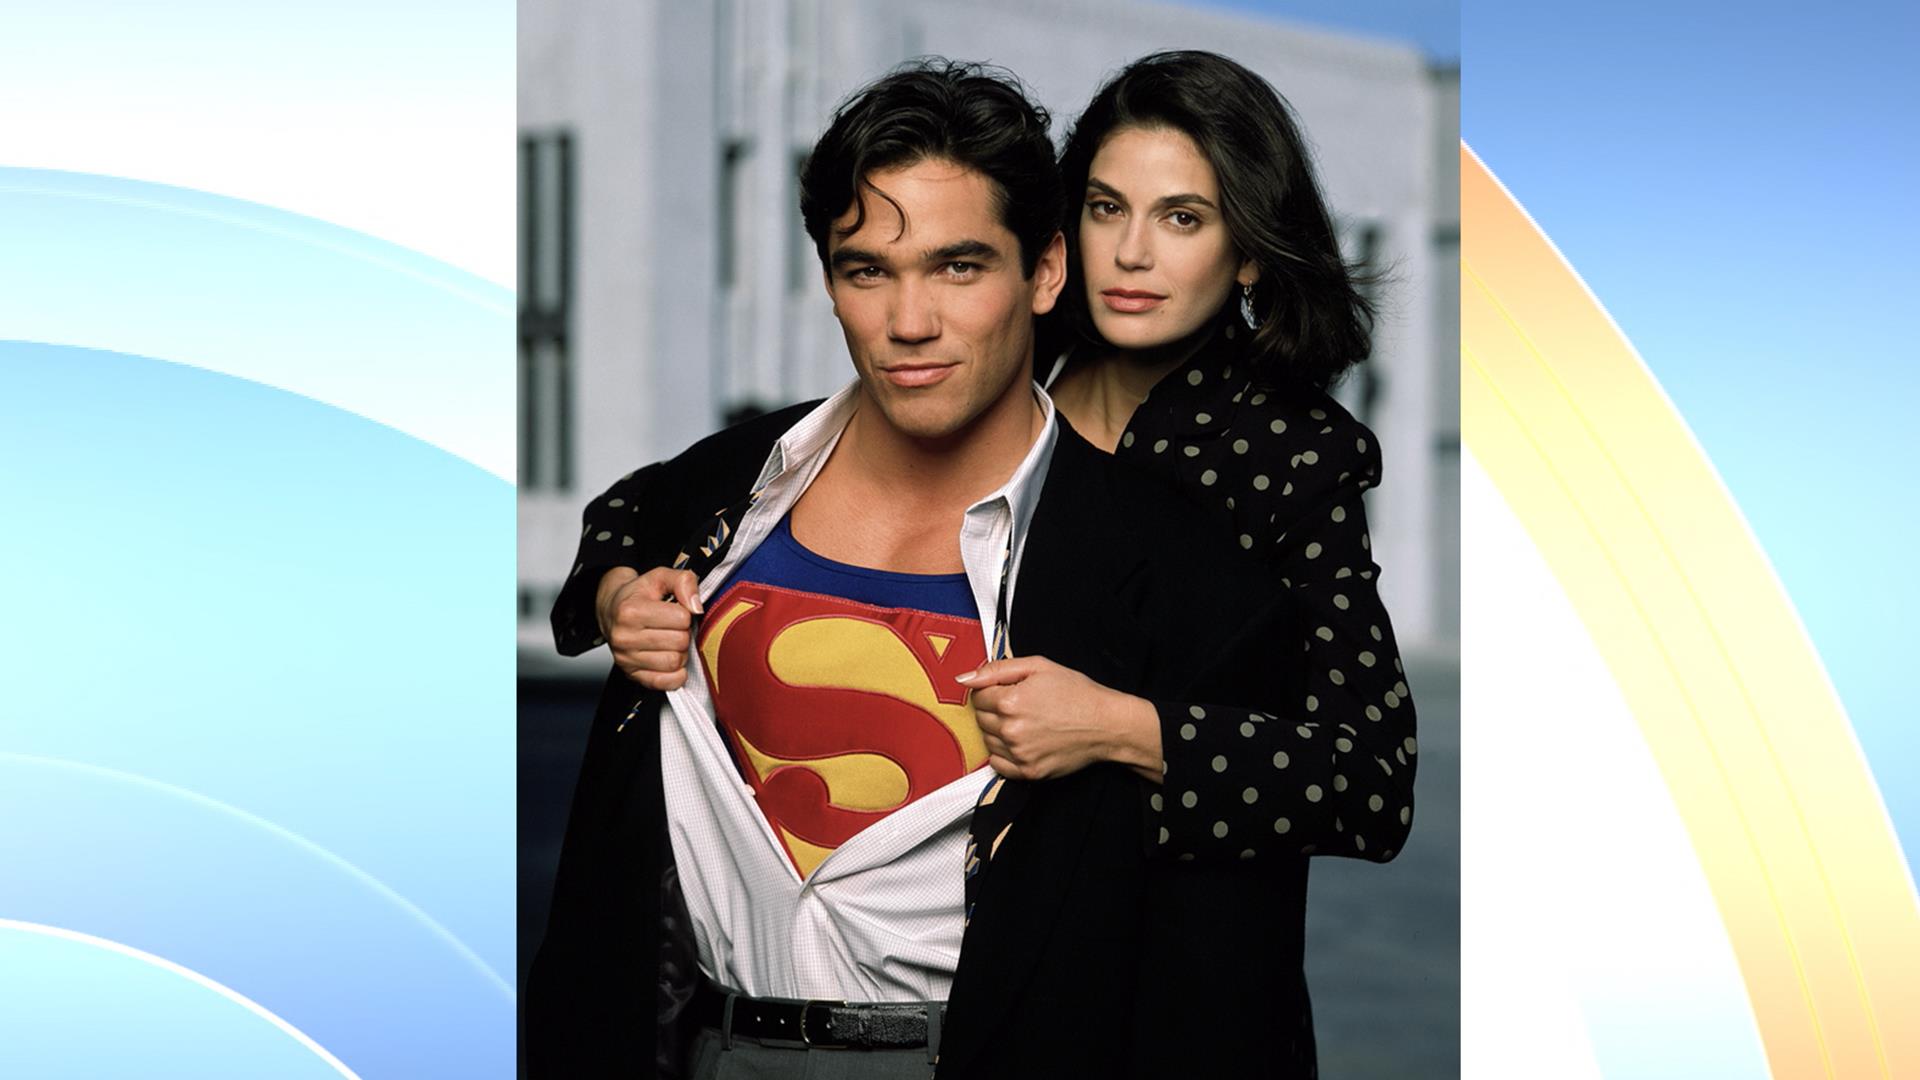 Dean Cain: Teri Hatcher will reunite with me on 'Supergirl'